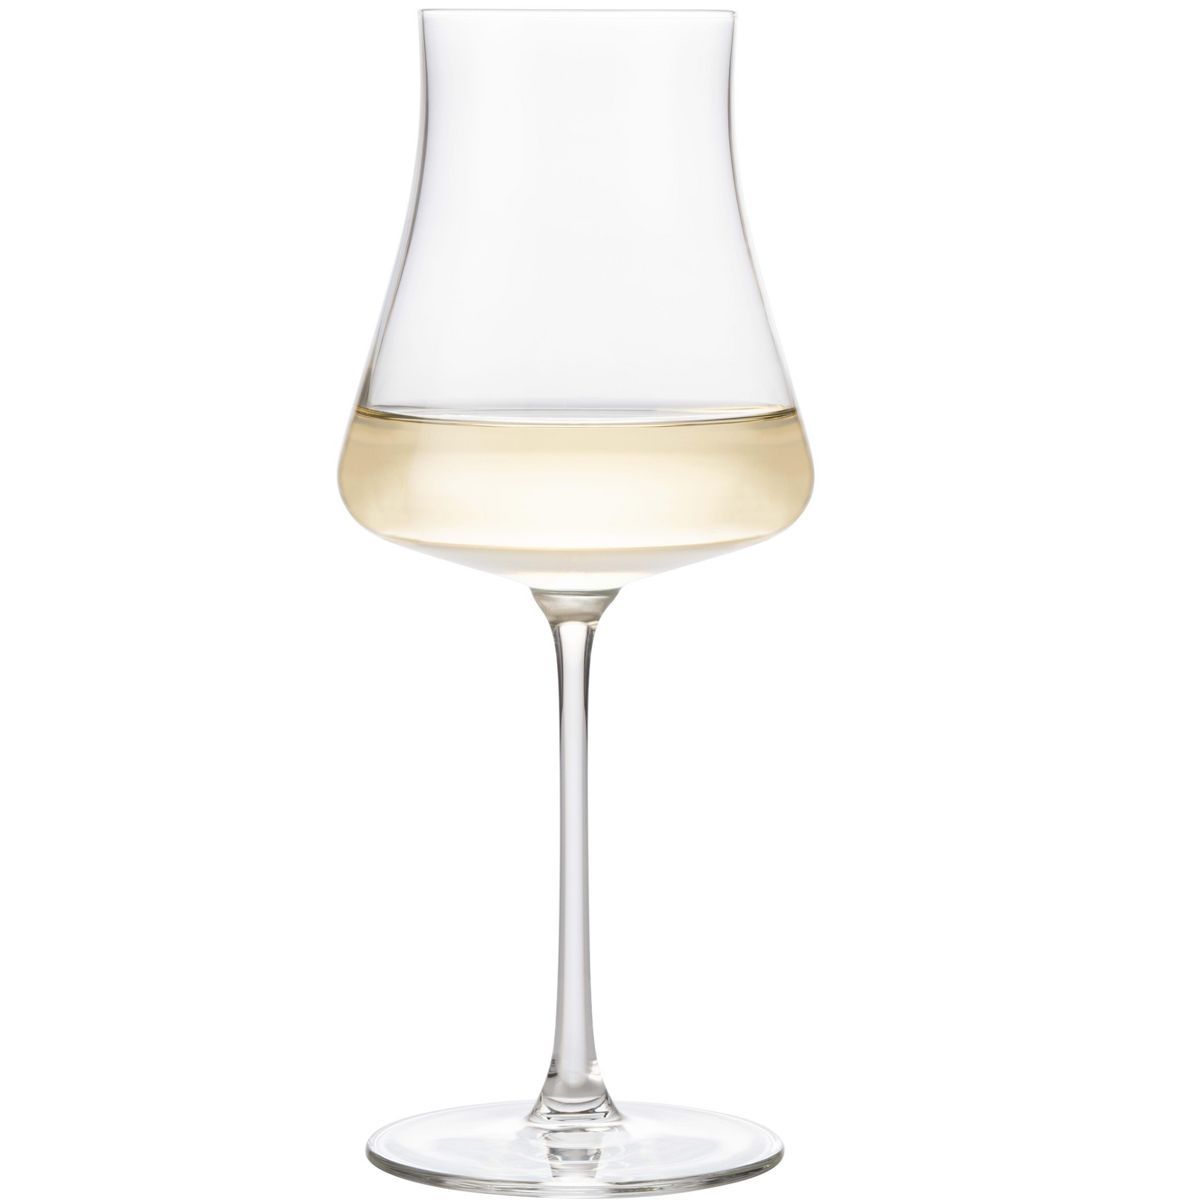 Libbey Signature Stratford All-Purpose Wine Glass, 16-ounce, Set of 4 | Target